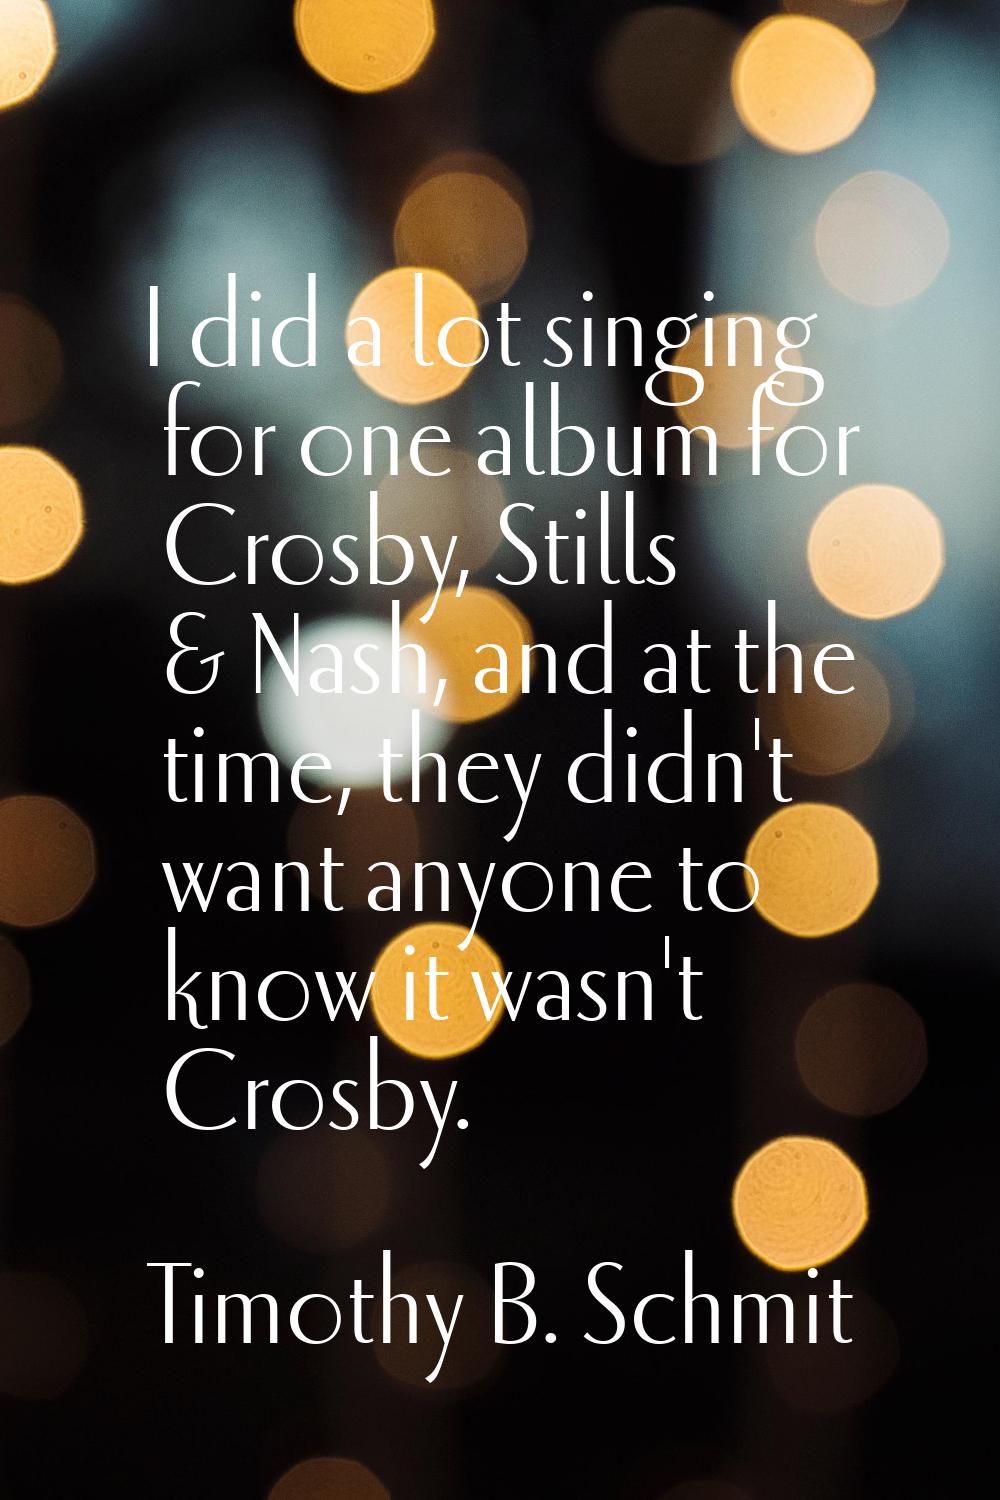 I did a lot singing for one album for Crosby, Stills & Nash, and at the time, they didn't want anyo